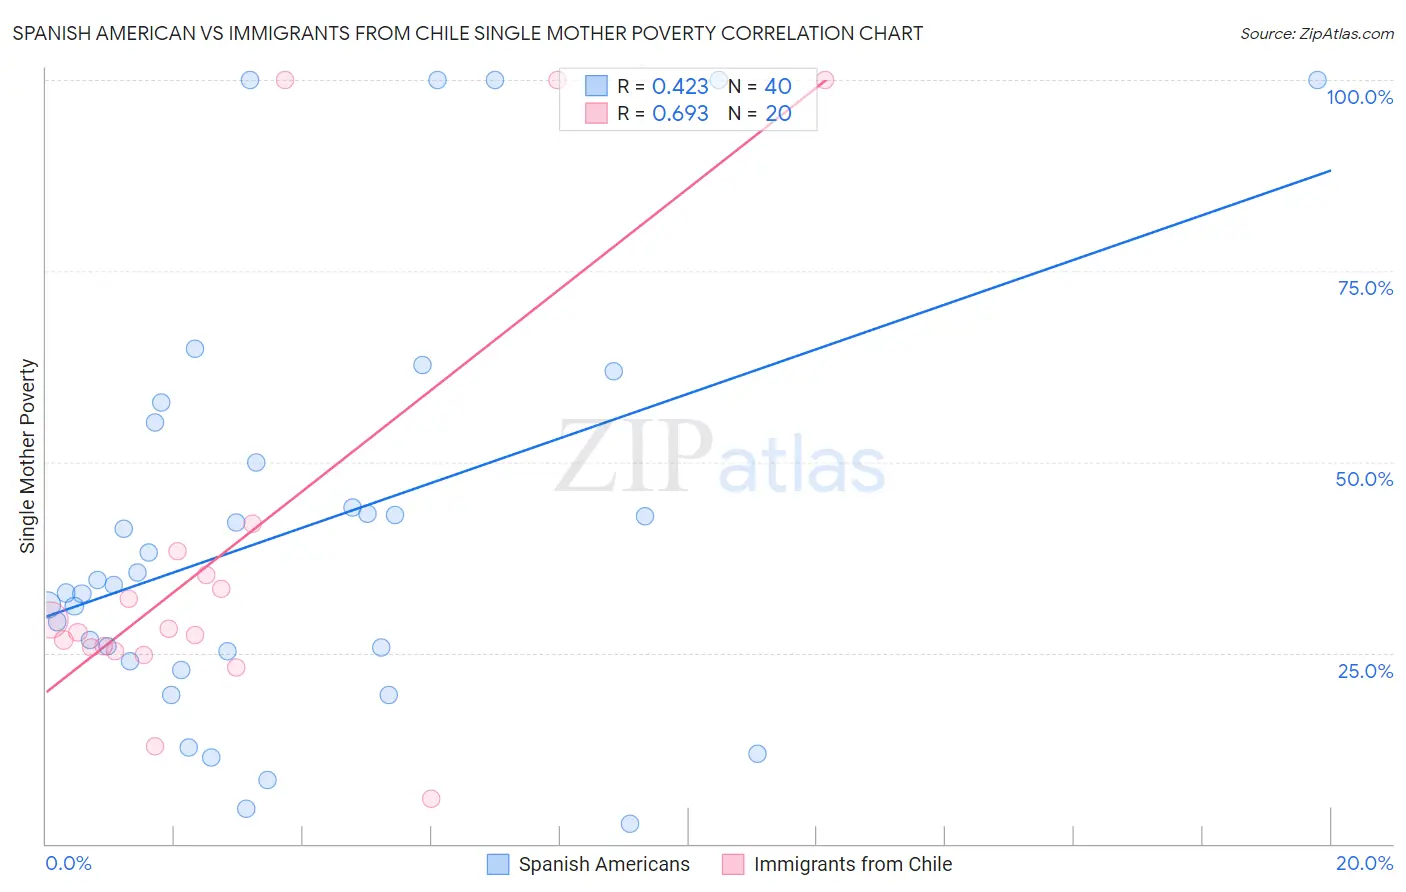 Spanish American vs Immigrants from Chile Single Mother Poverty